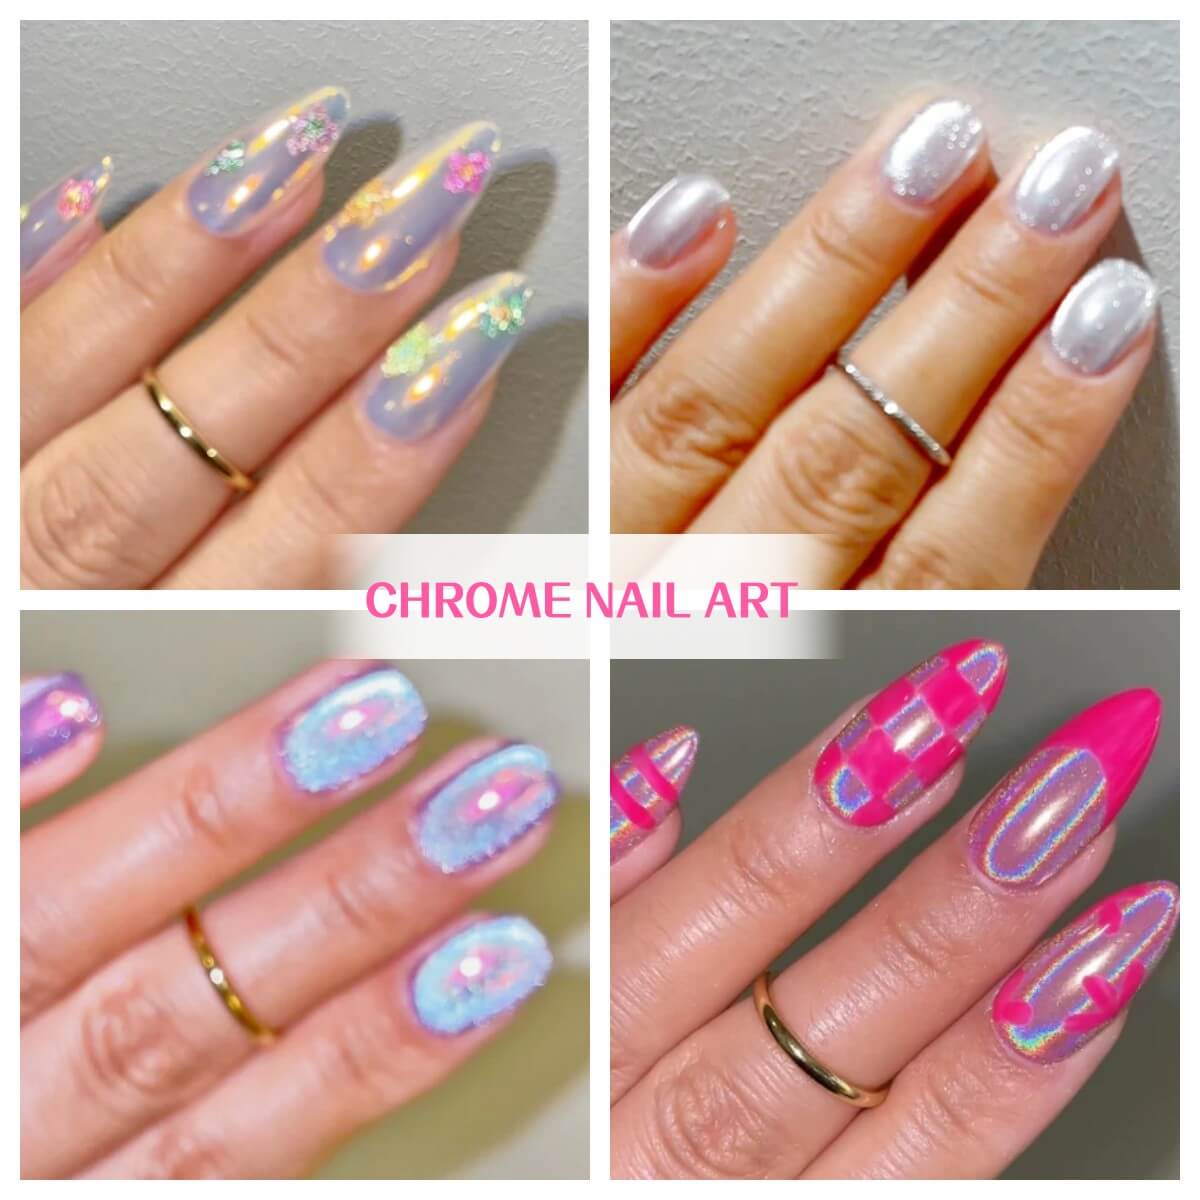 "Chrome Nails" Is the Perfect Manicure Trend To Revamp Your Summer Nails